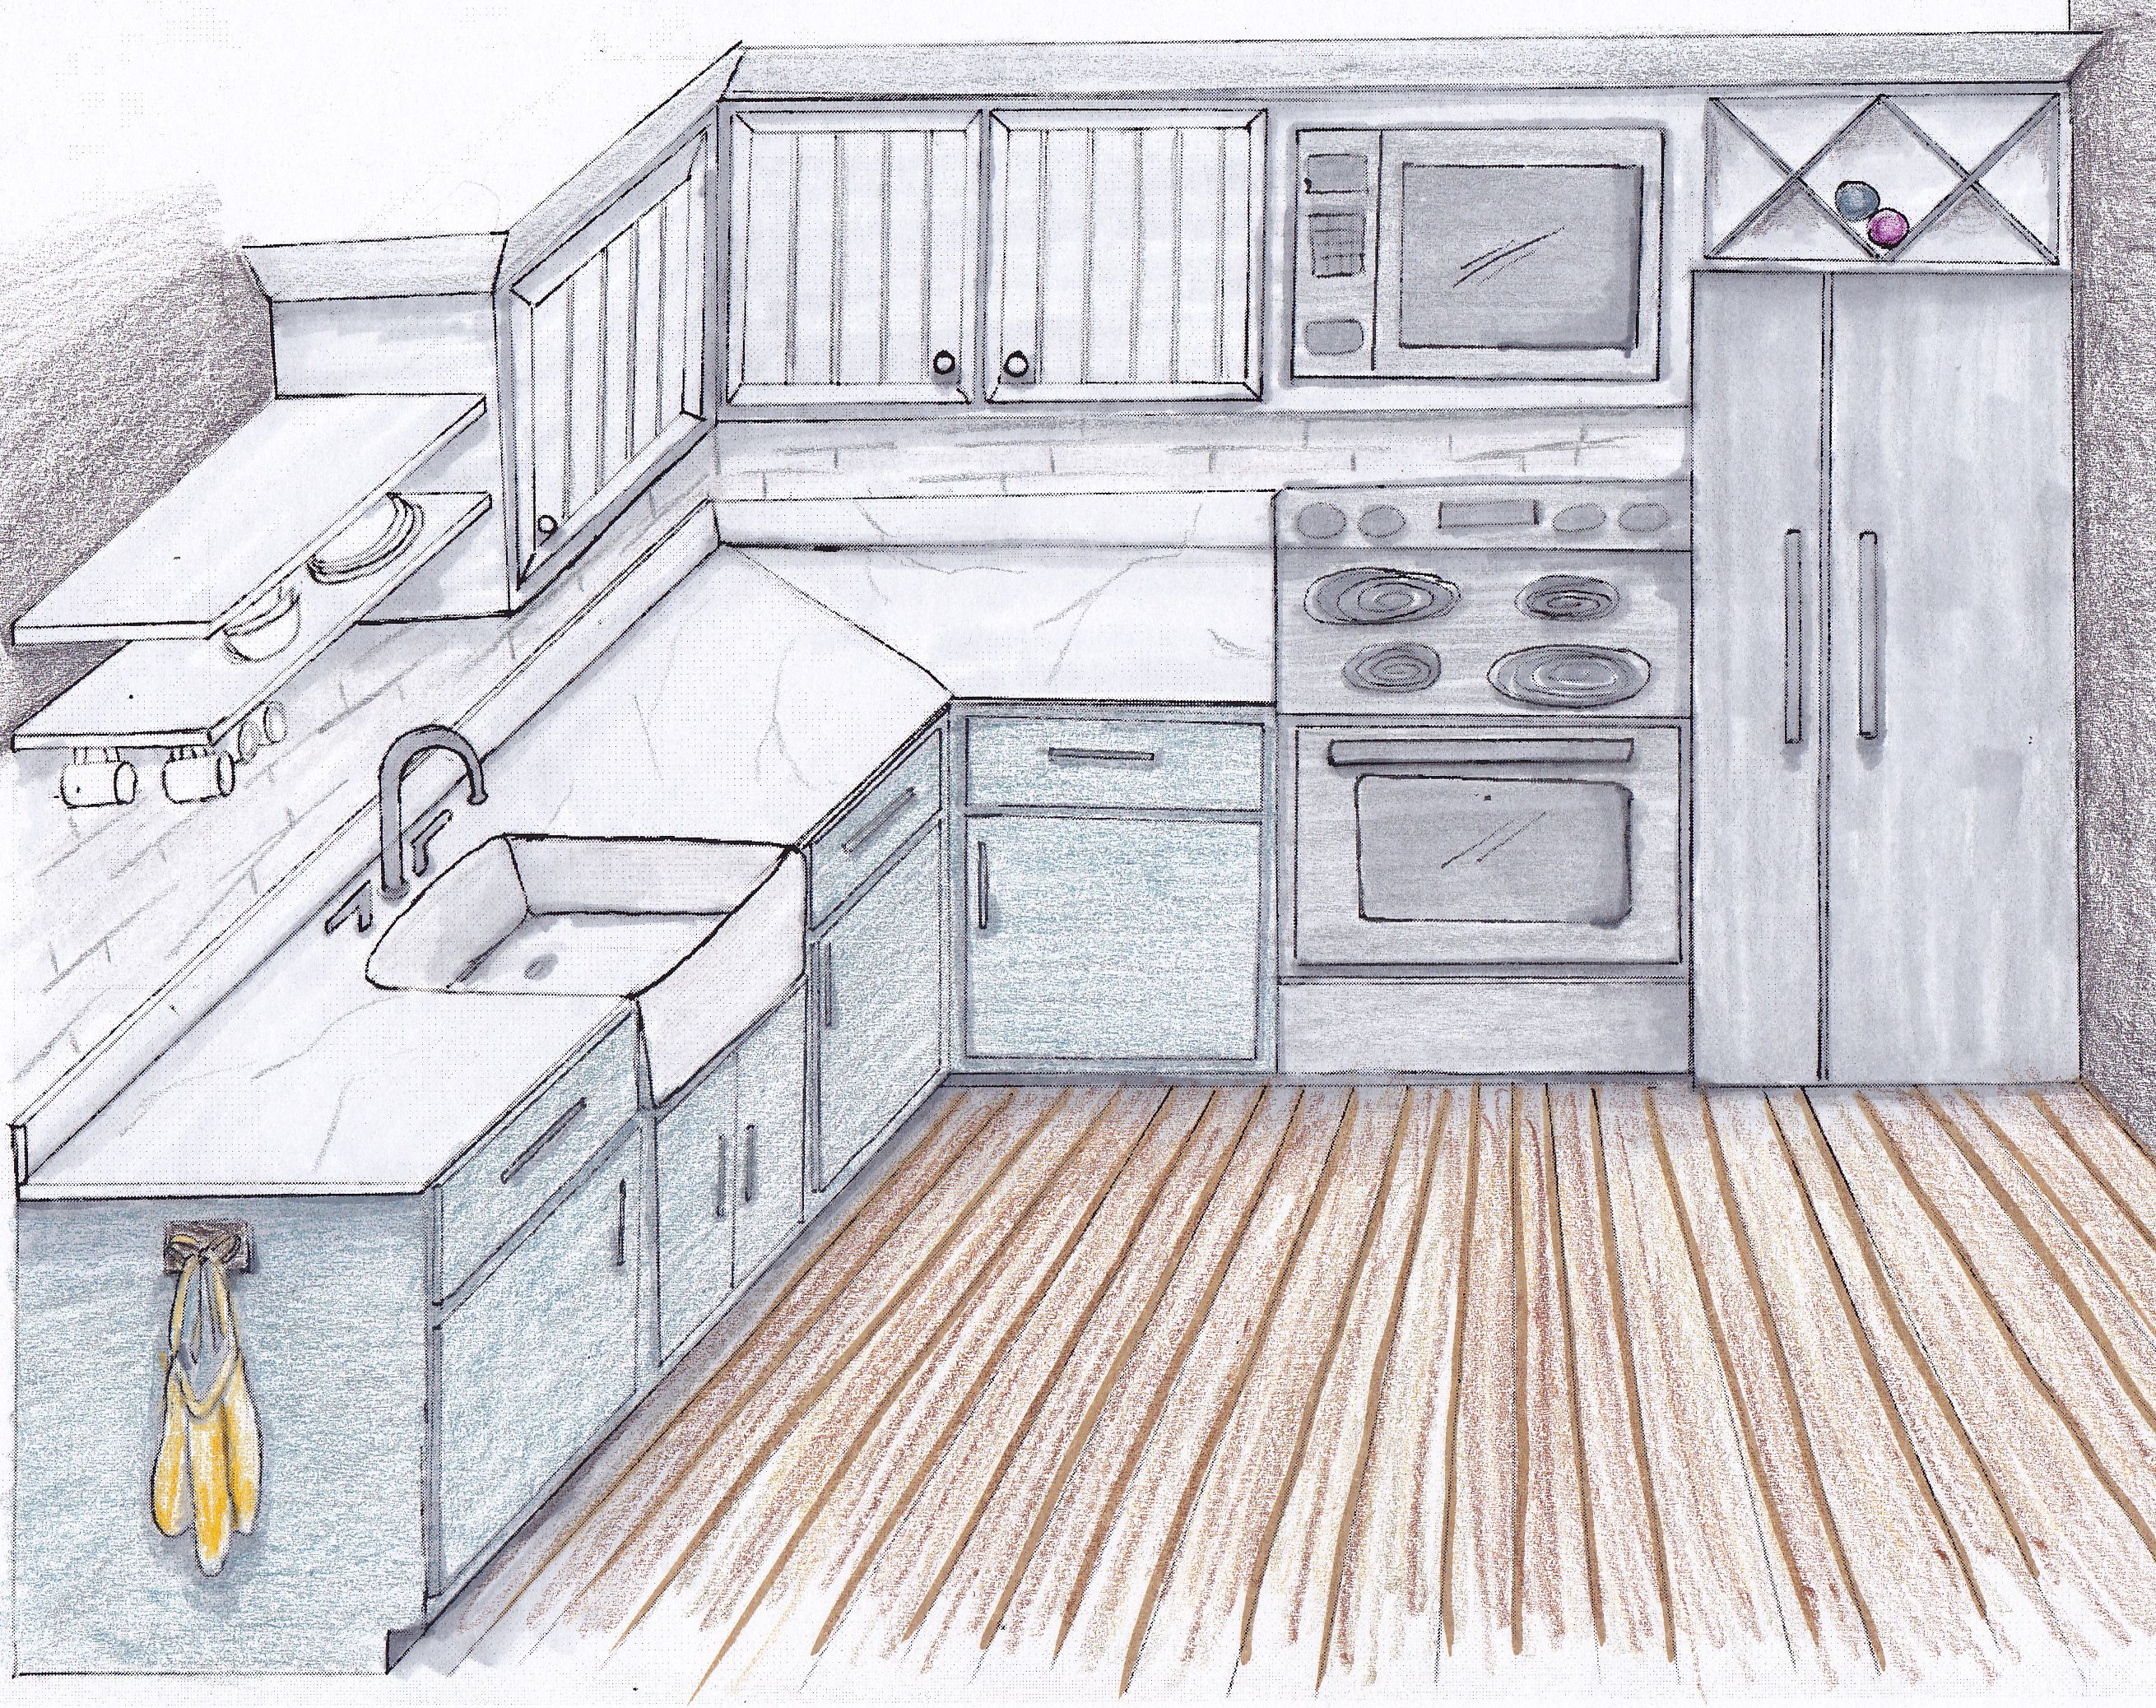  kitchen design drawings